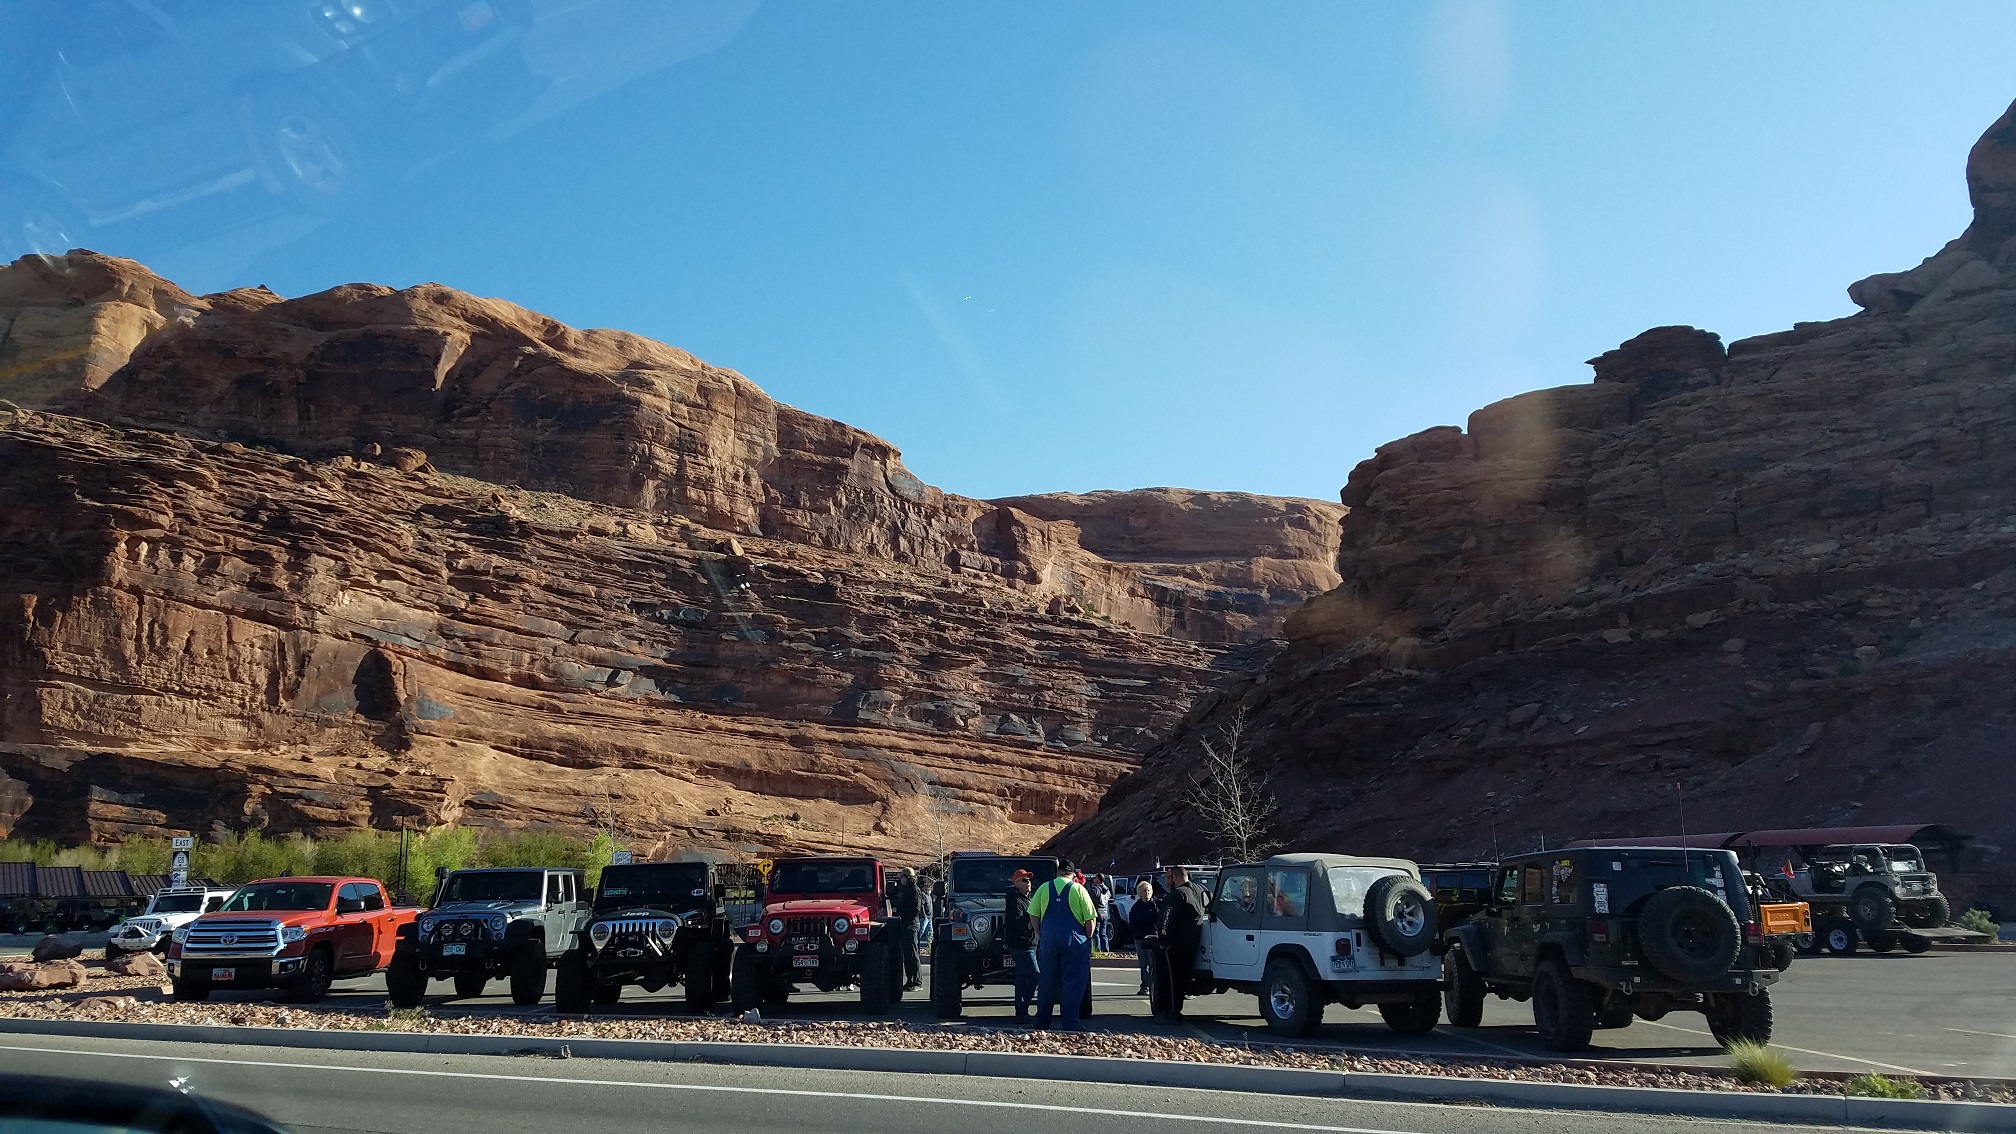 Driving Jeep Concepts Caps an Eventful Journey to Moab